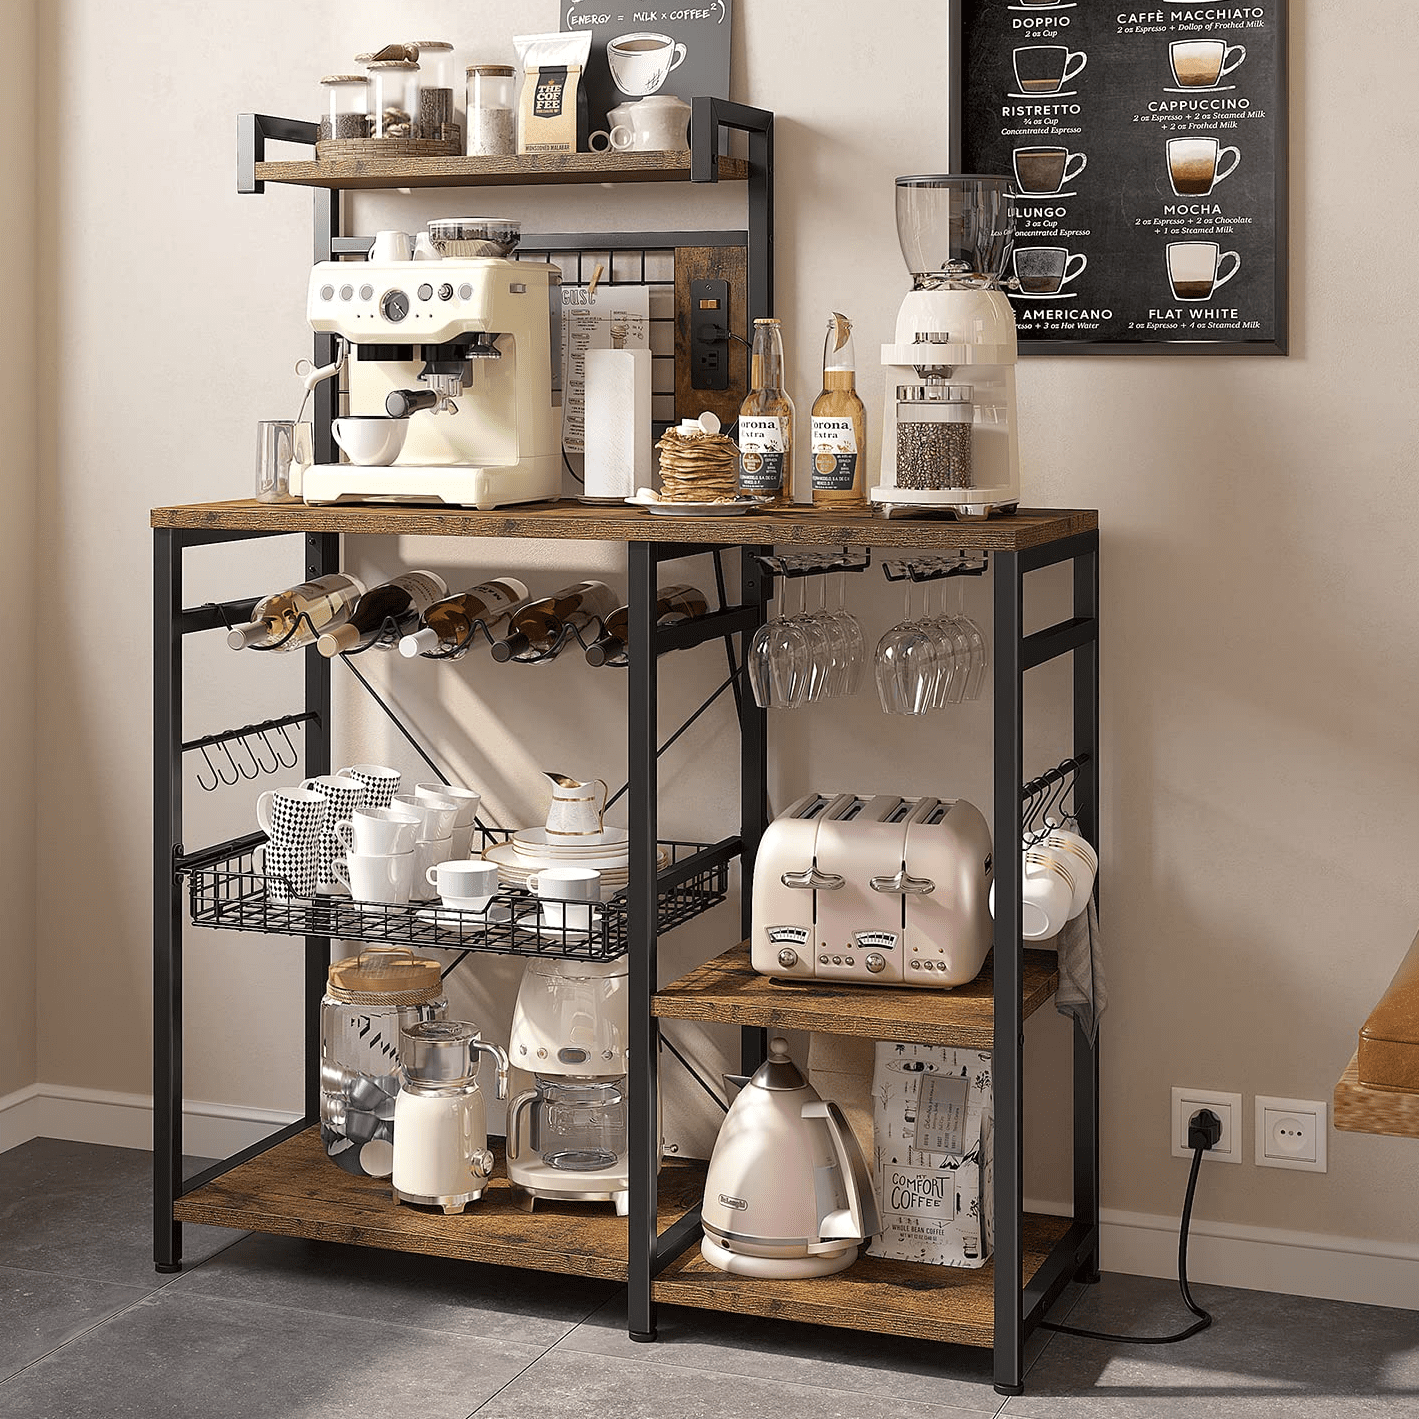 EnHomee 6 Tier Kitchen Bakers Rack Microwave Oven Stand with Storage Coffee  Bar with Shelves Cabinet Hooks, 29.5 W * 13.9 D * 63 H Rustic Brown 